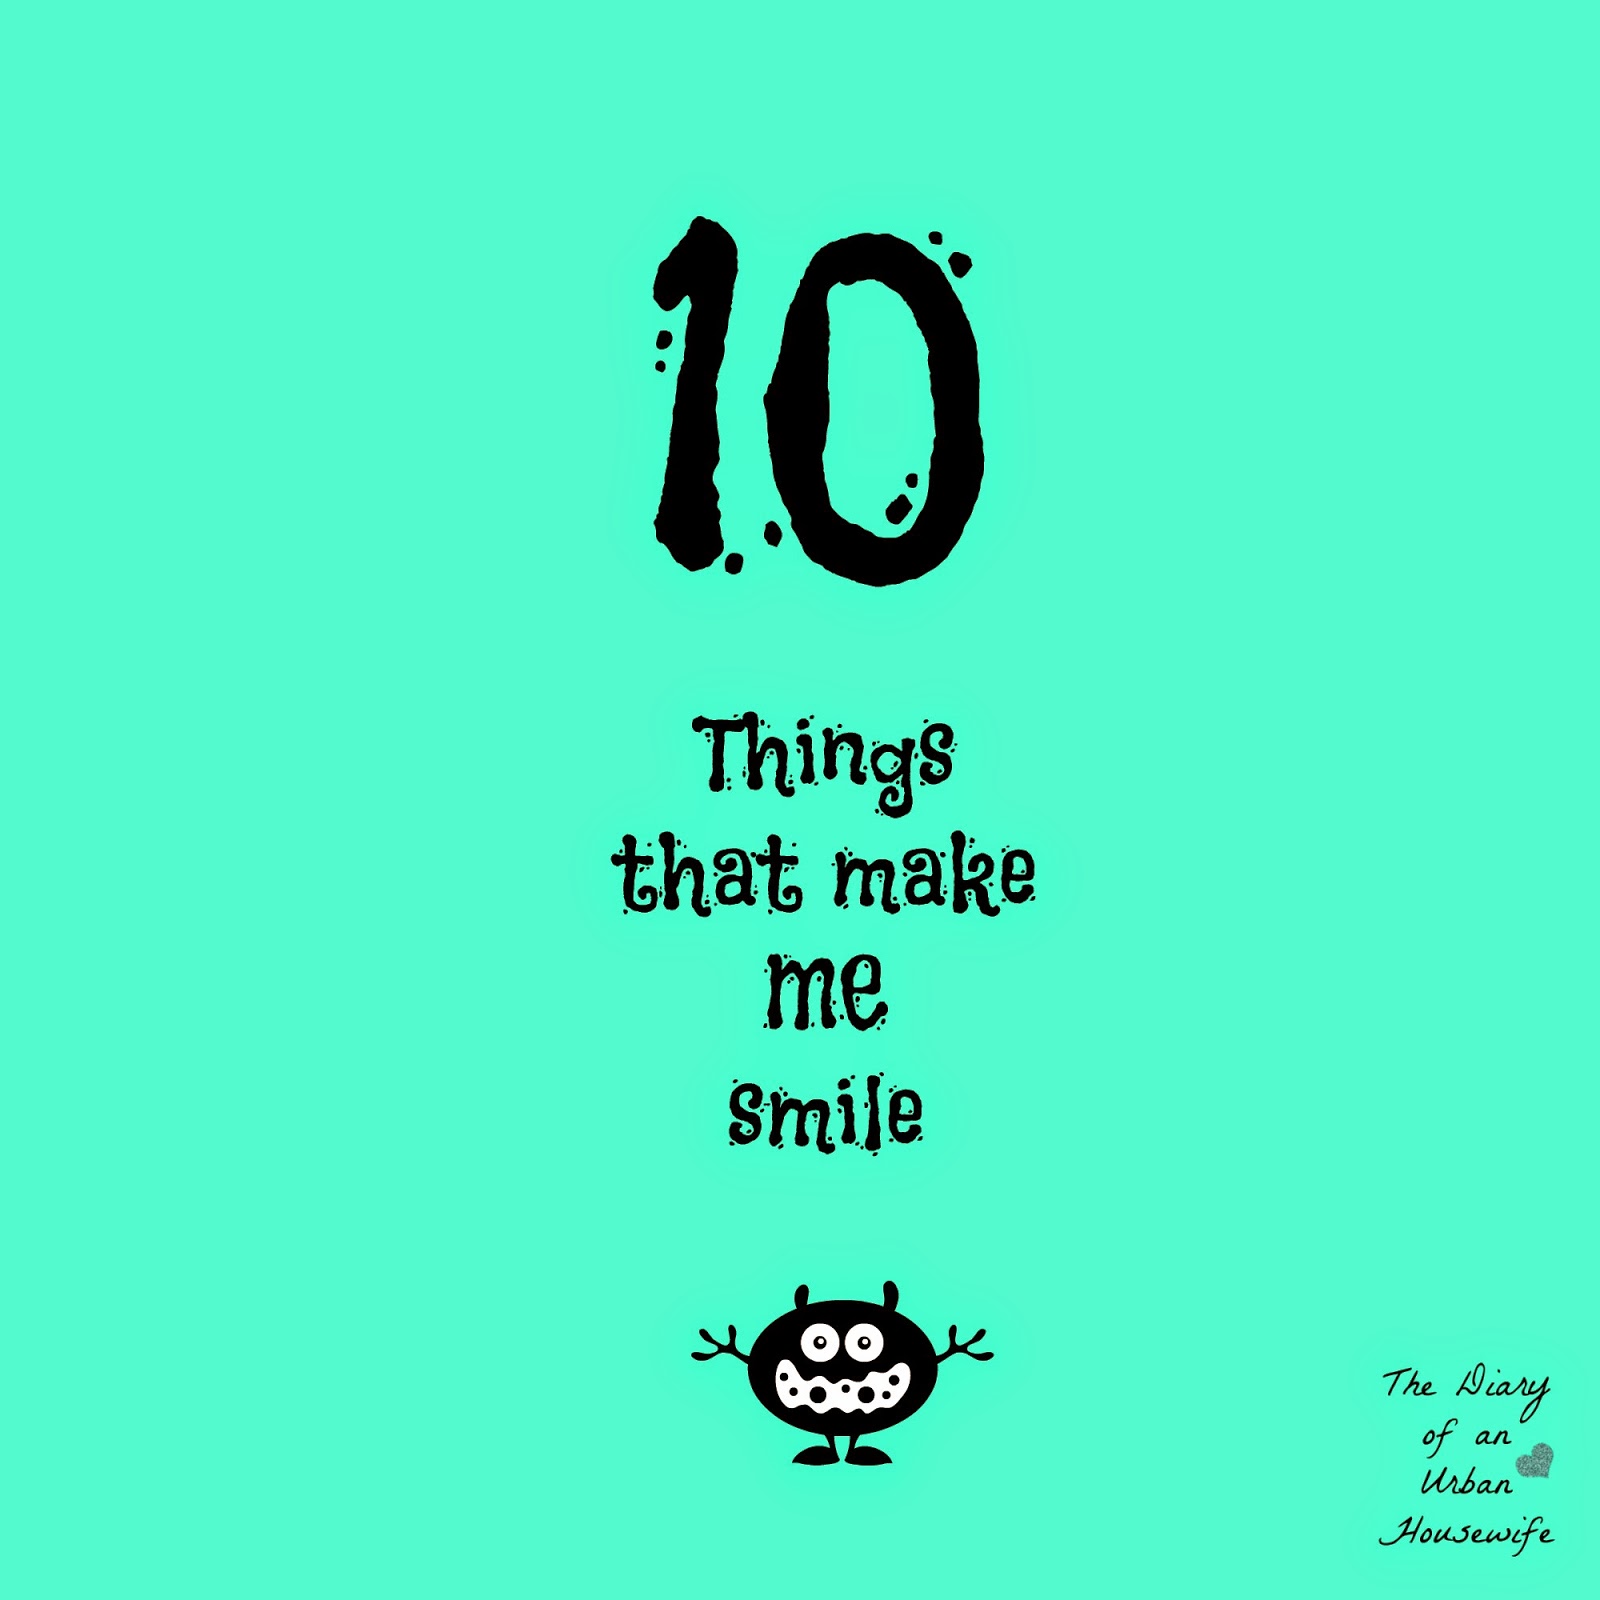 10 Little Things That Make Me Happy - The Reluctant Blogger